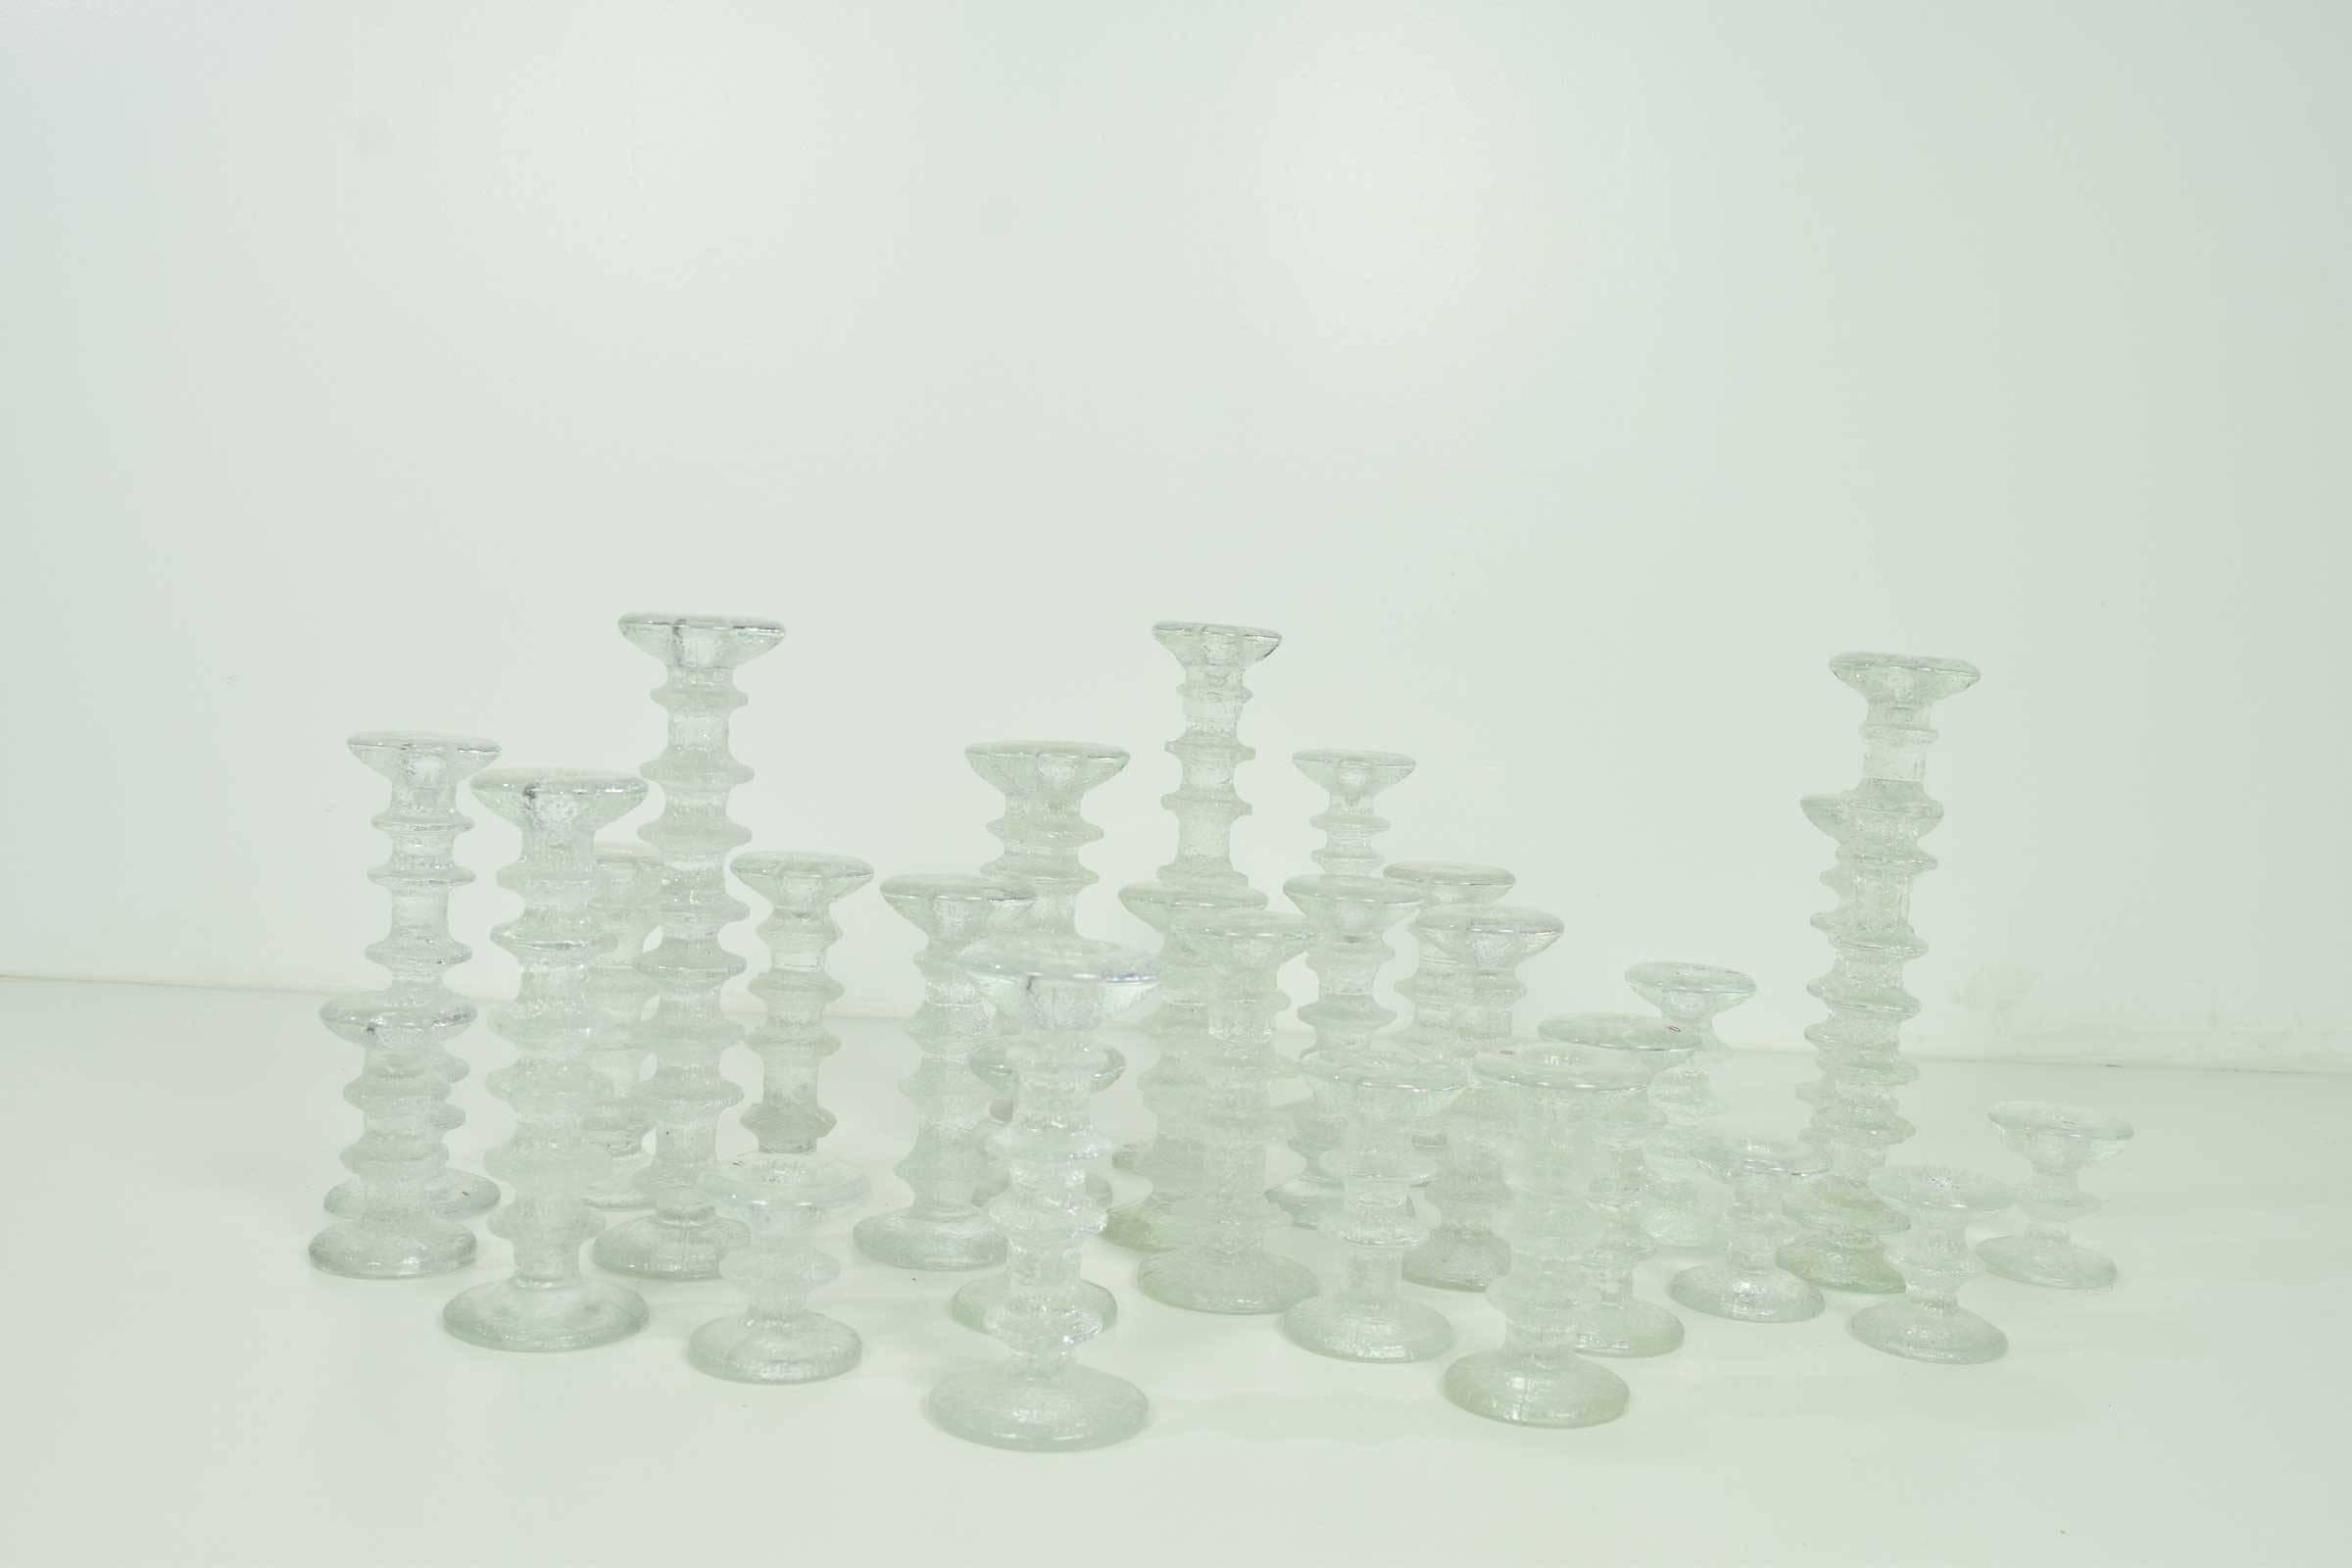 Beautiful on a tabletop, console or coffee table. Large grouping of Timo Sarpaneva candlesticks. Three-eight ring, six-six ring, nine-four ring, three-three ring, three-two ring, six-one ring. Measurement is for the tallest candlestick. They vary in